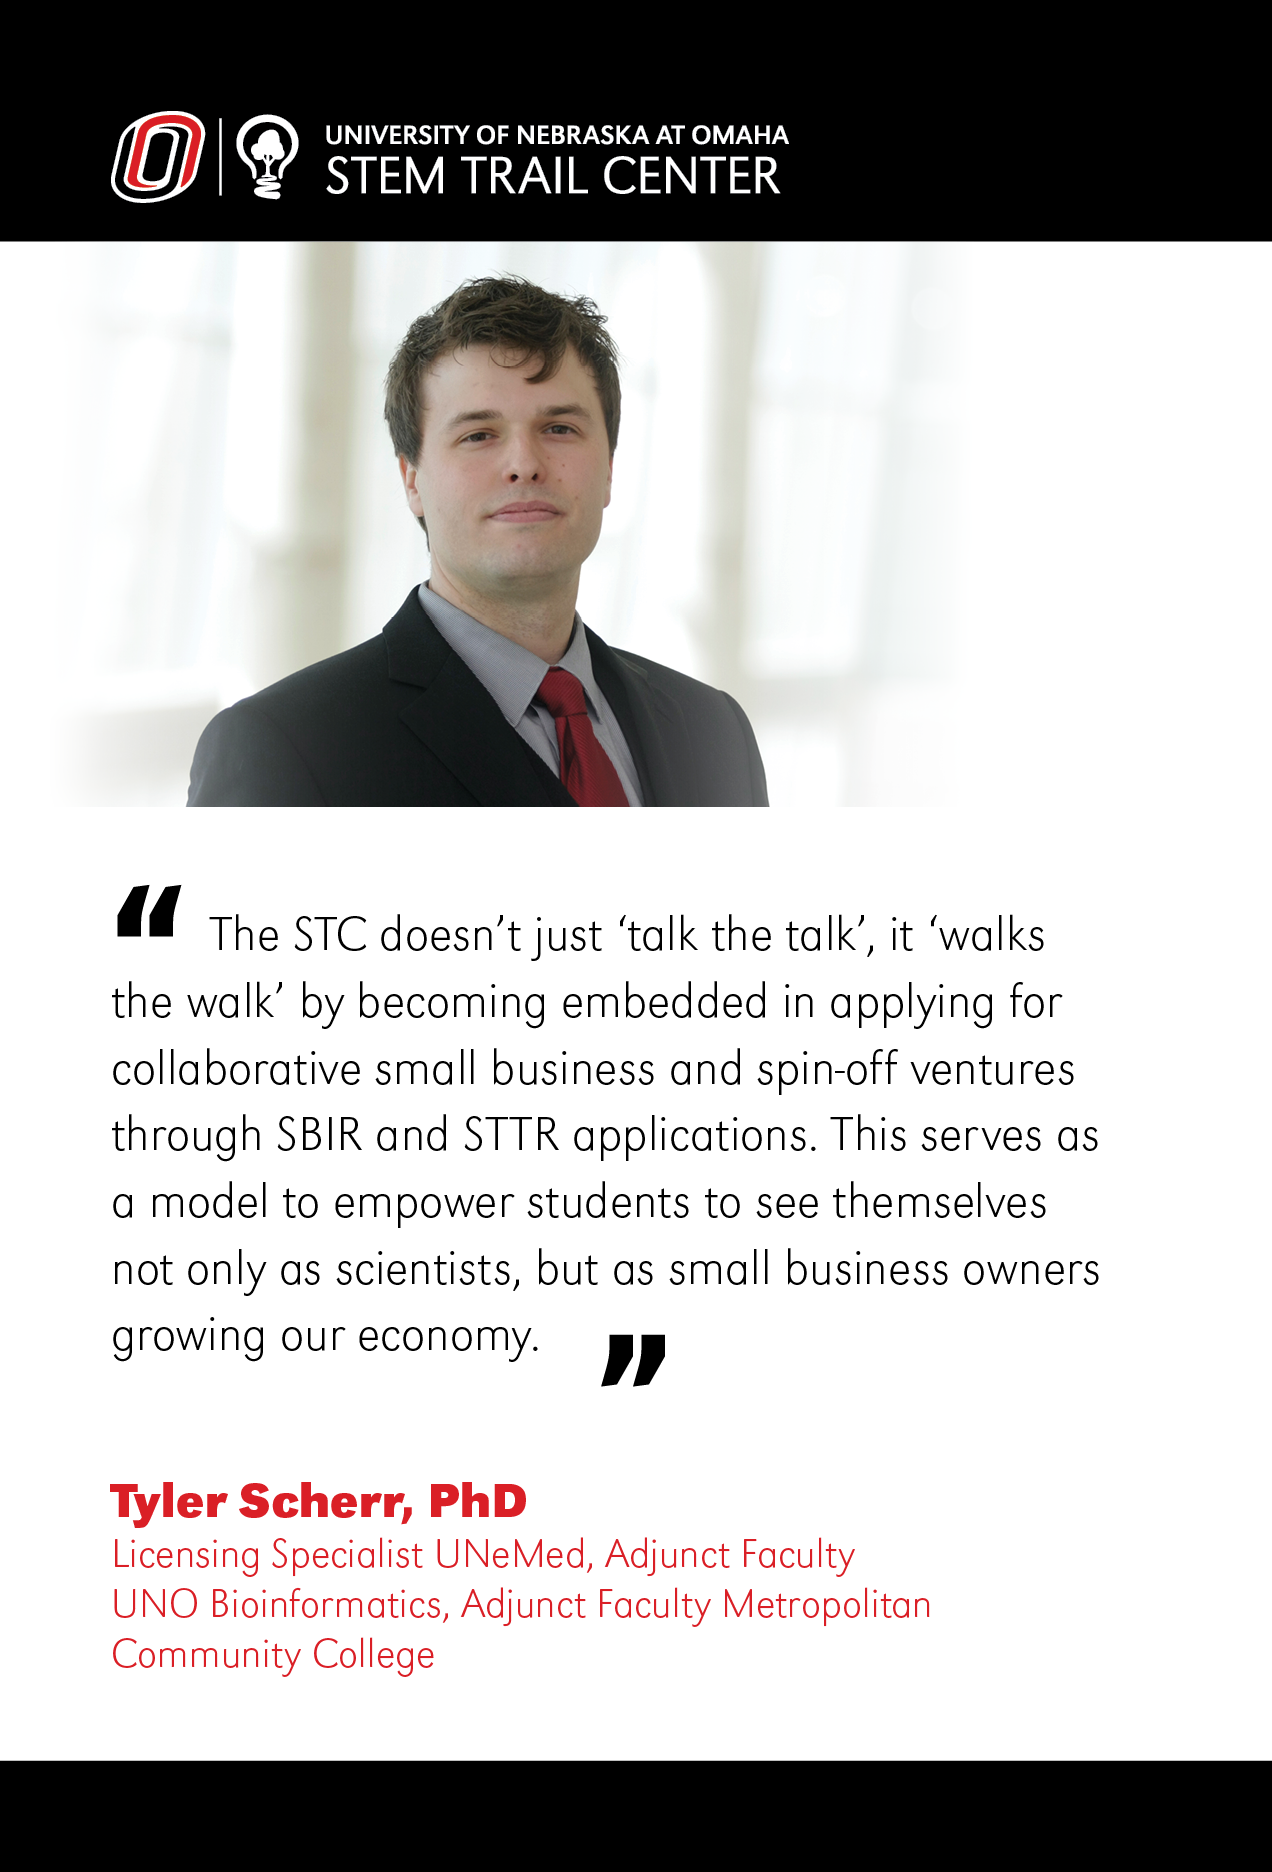 An image of the STC logo with a photo of Tyler Scherr who is wearing a suit. The bottom half of the image is his quote in black font.